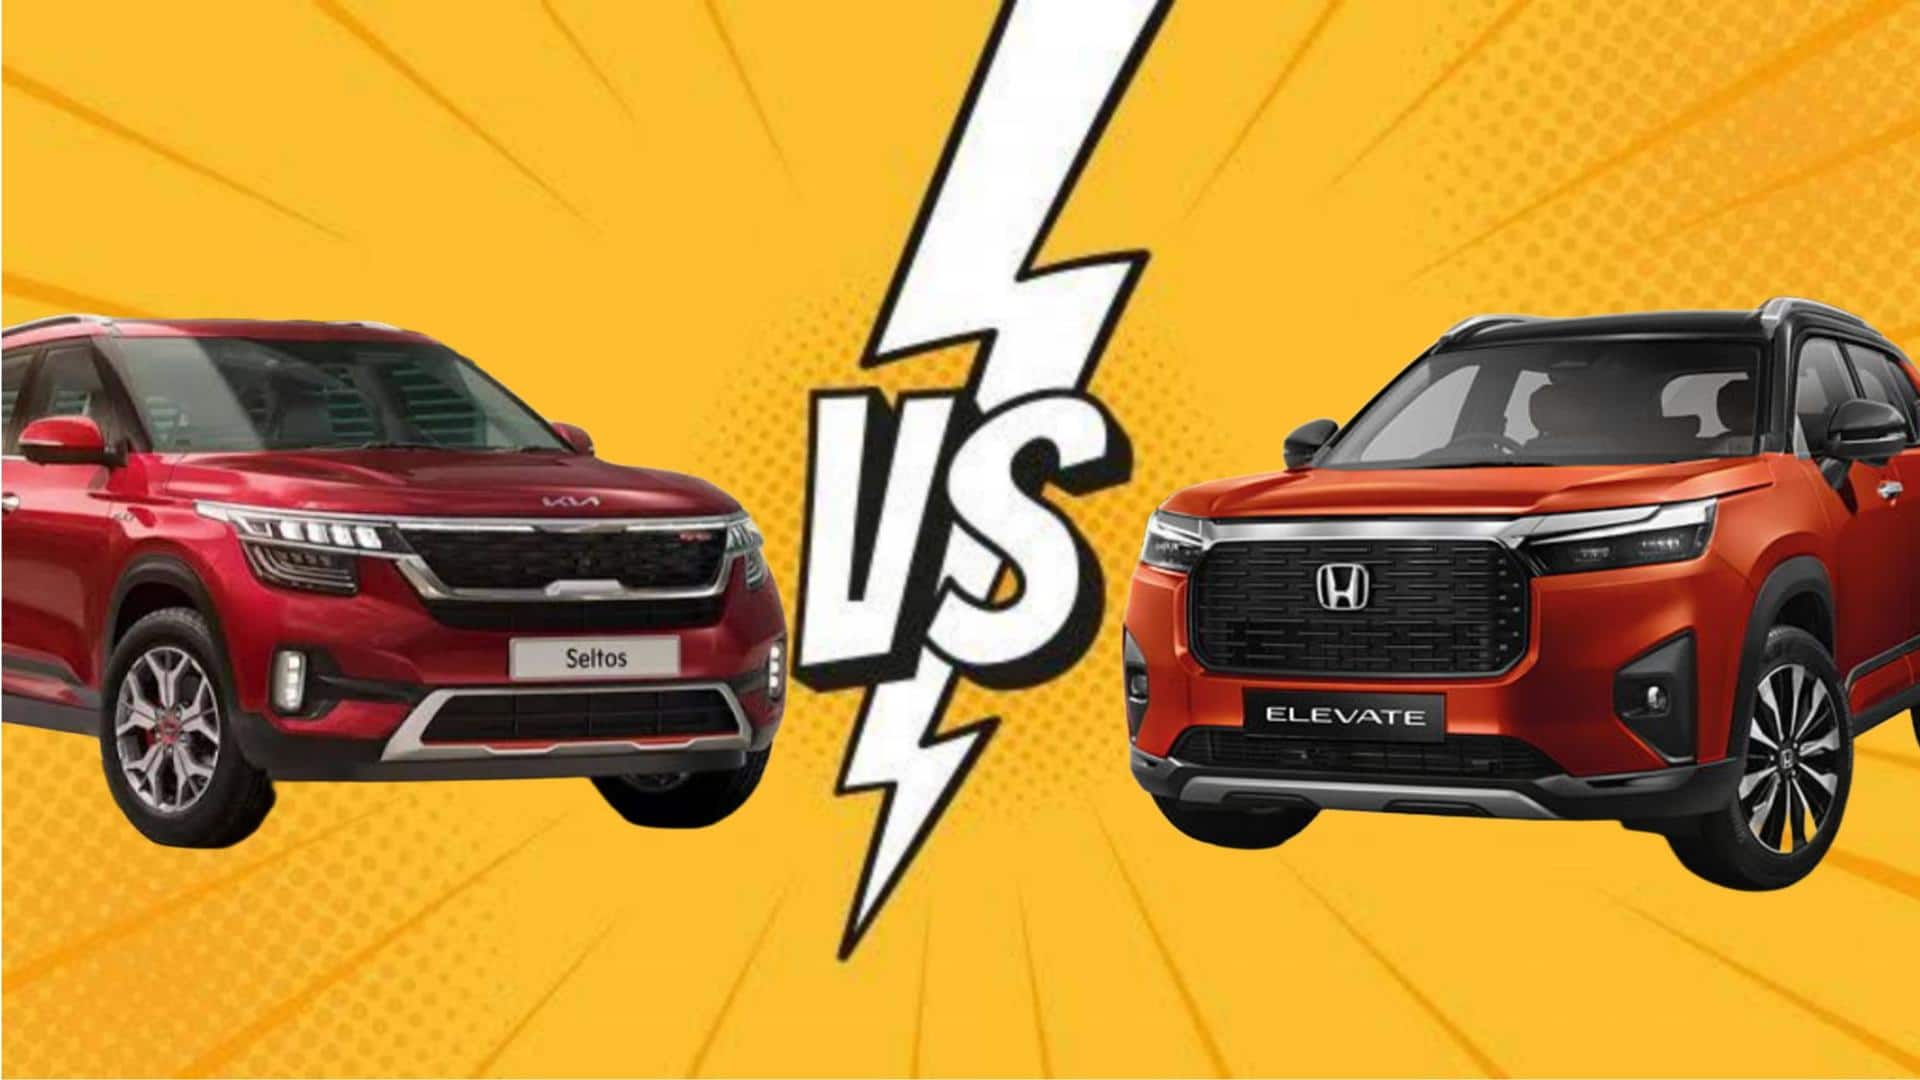 Can Kia Seltos retain its crown against all-new Honda Elevate